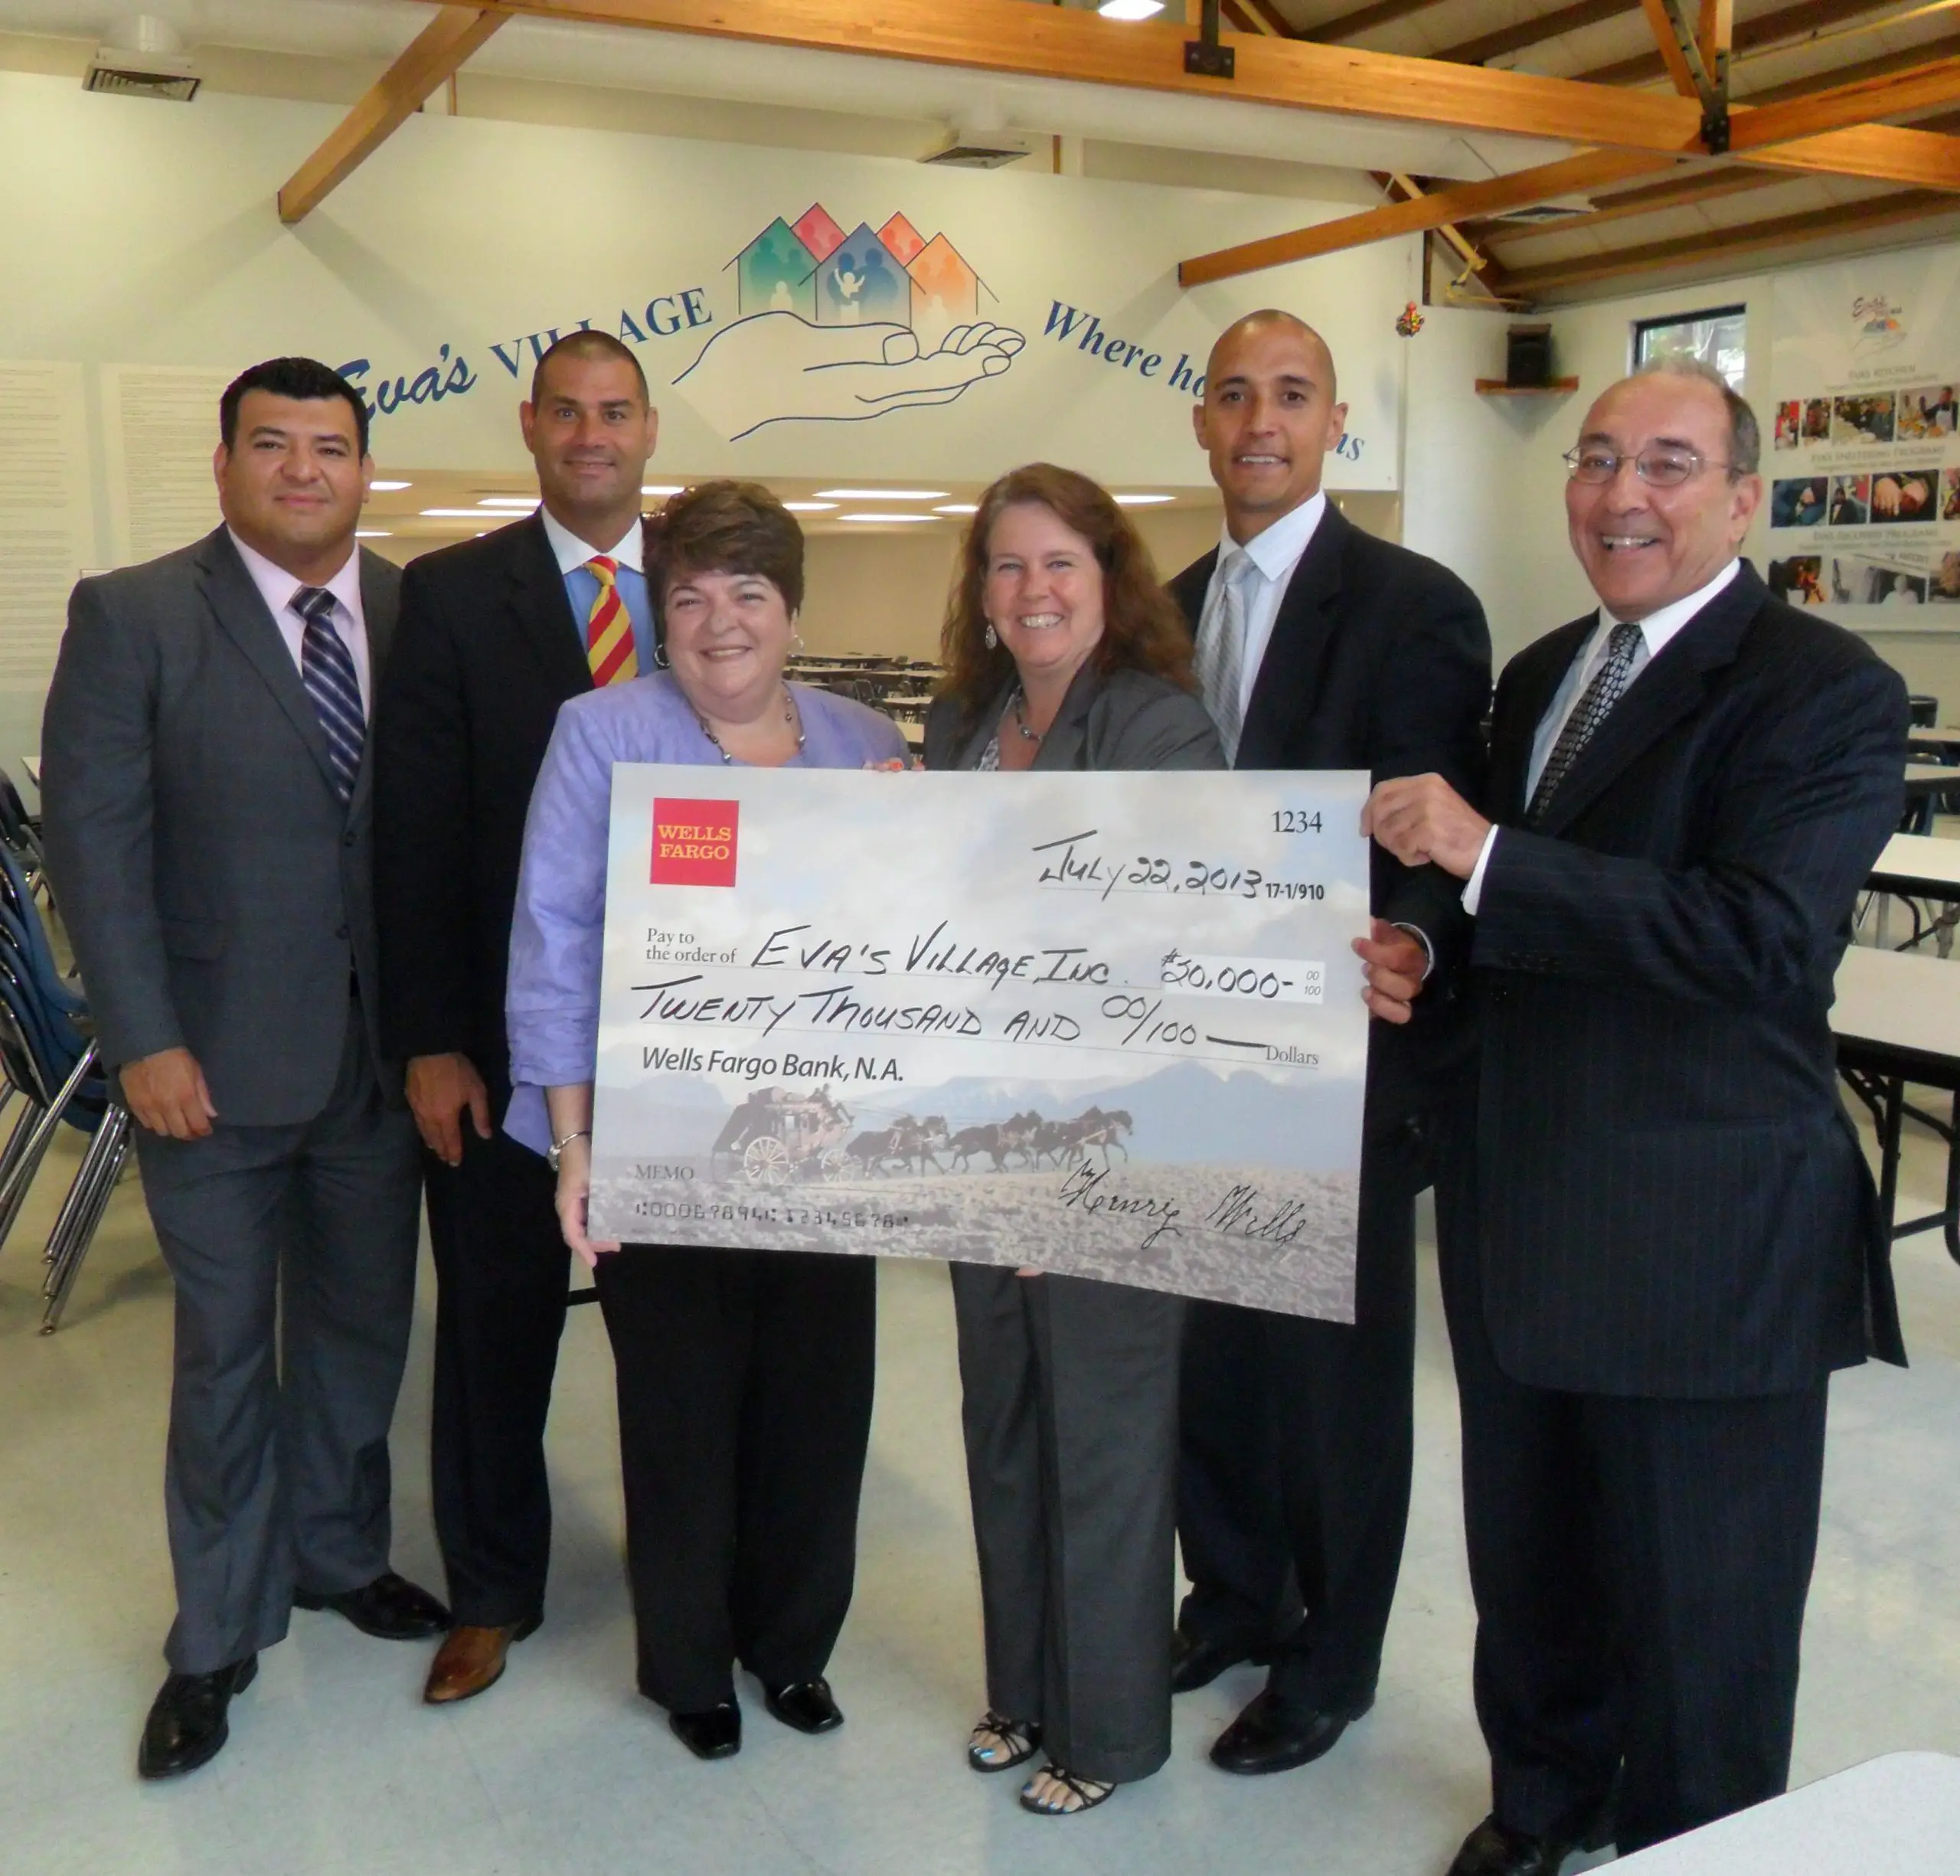 Evaâs Village Receives Funding from Wells Fargo Foundation to Support ...